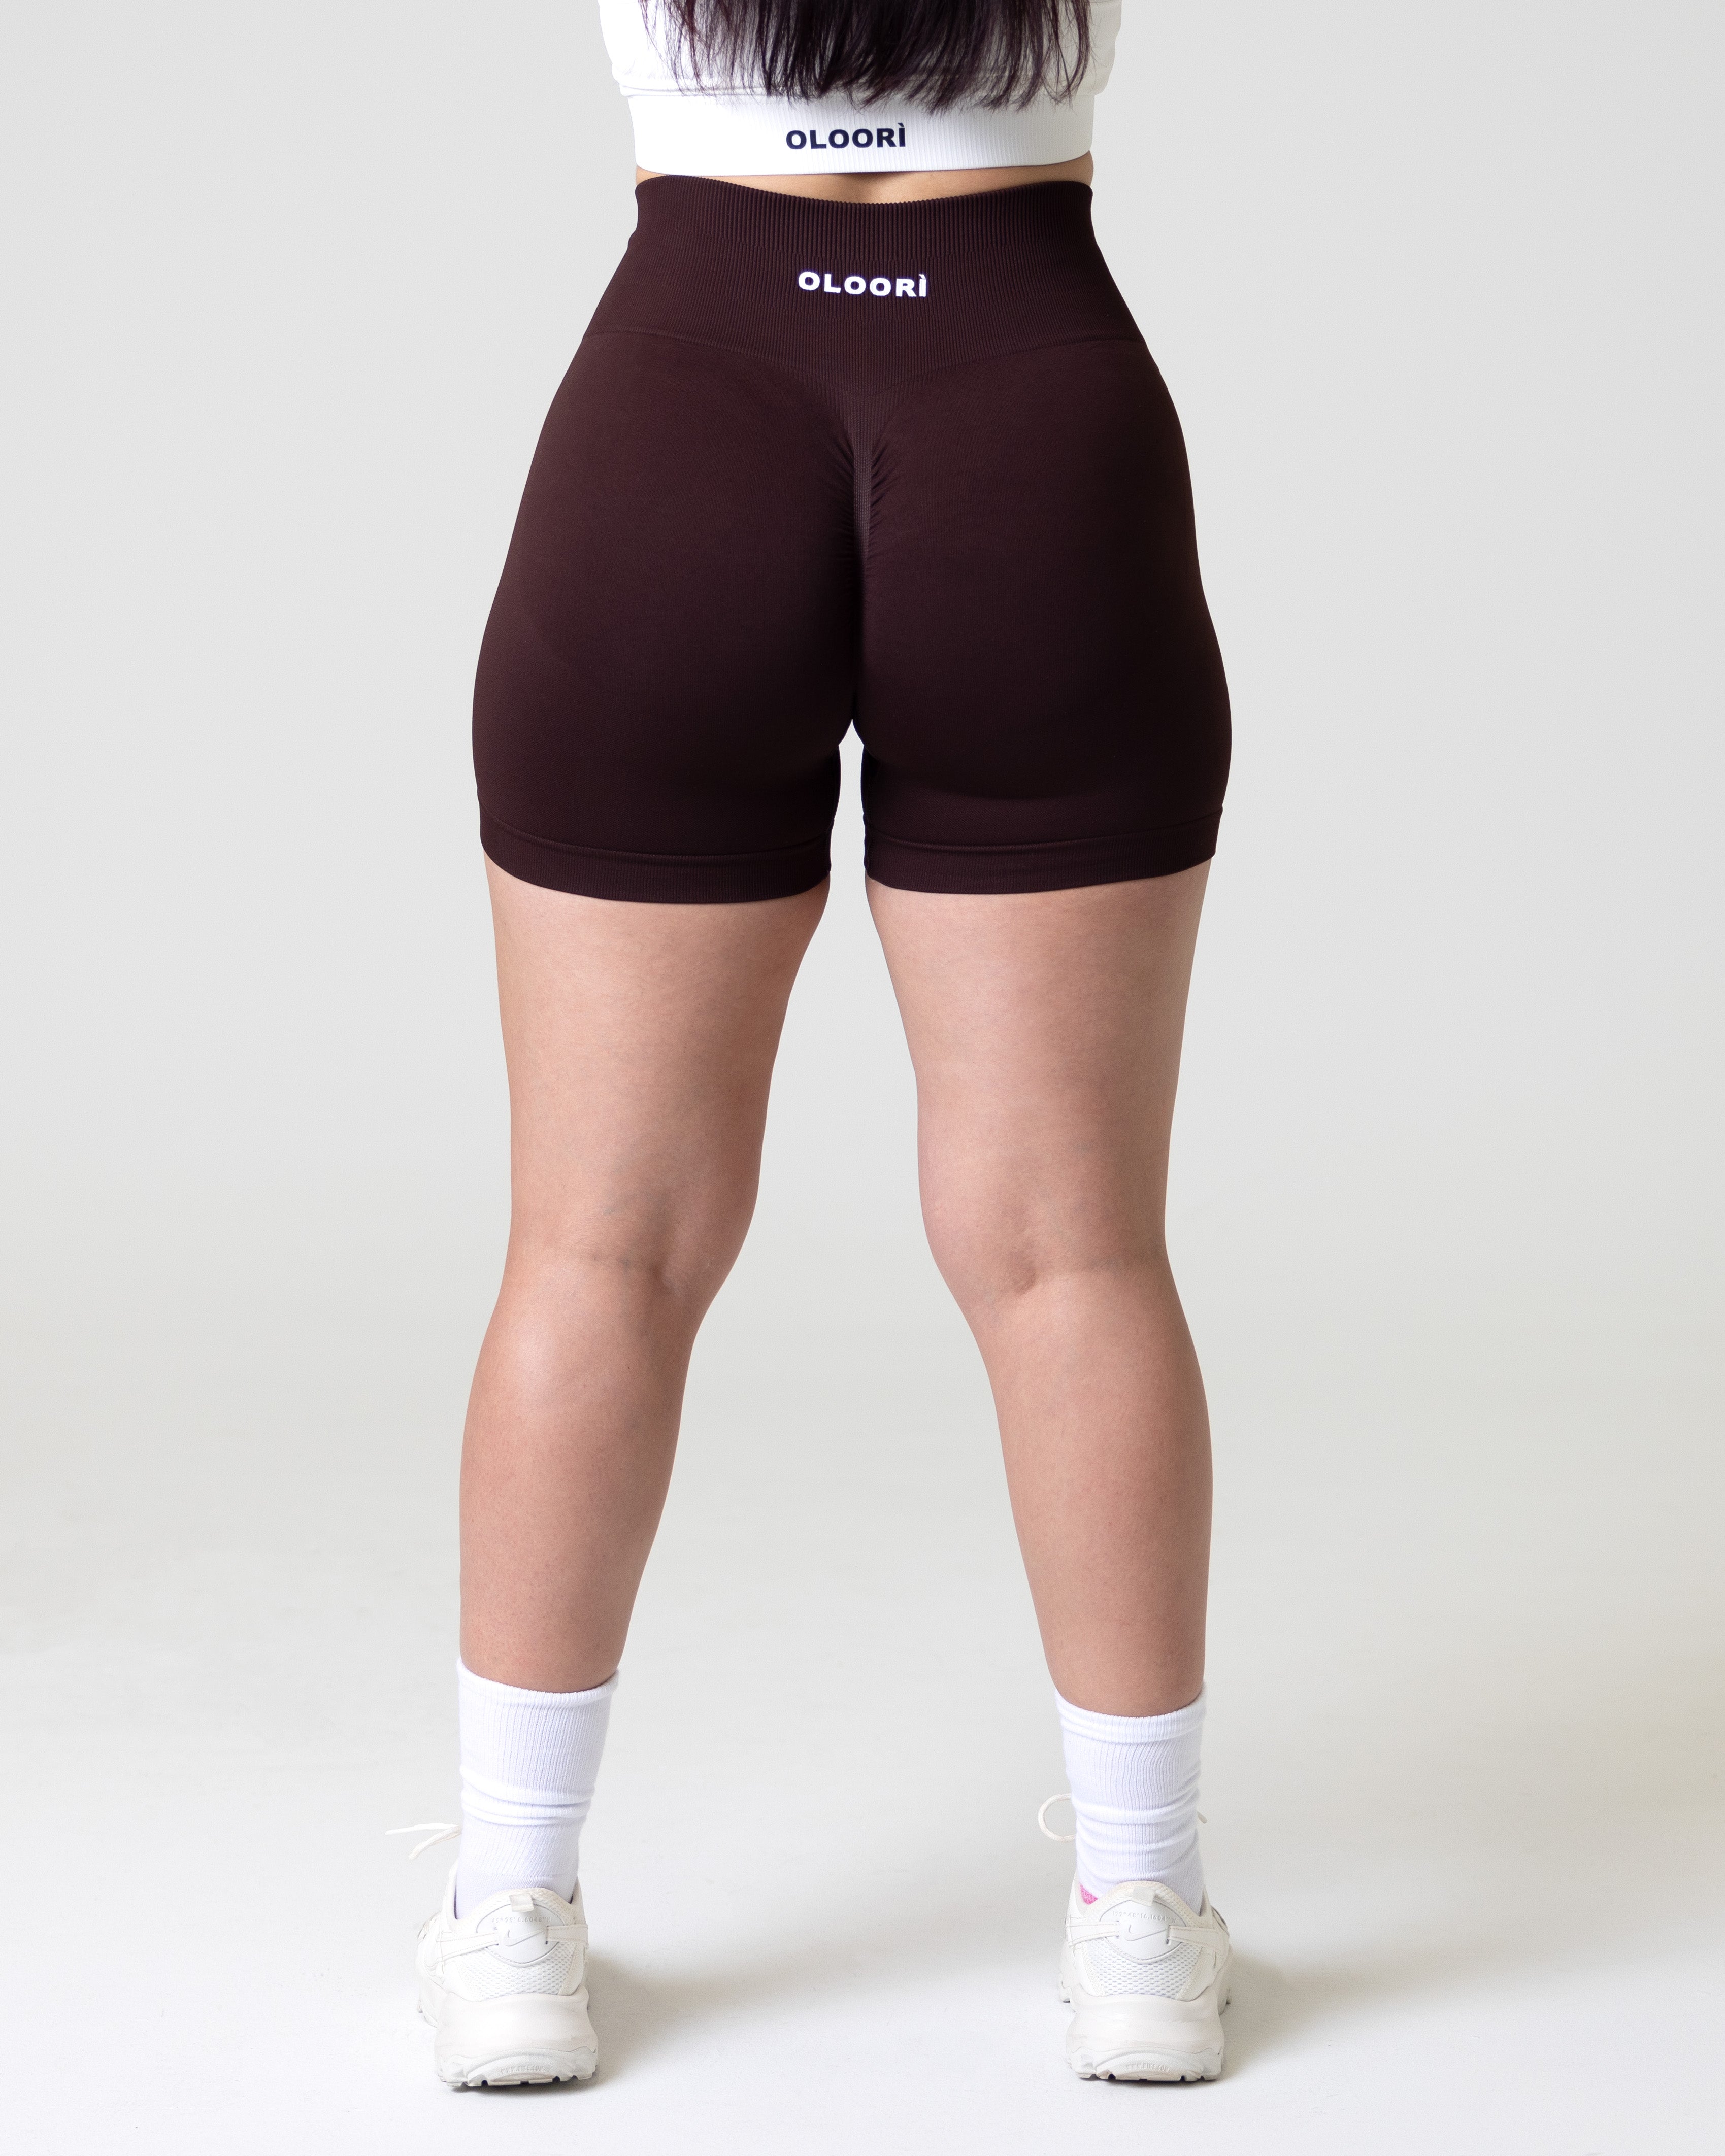 A woman wearing brown sepia elevate seamless fitness shorts